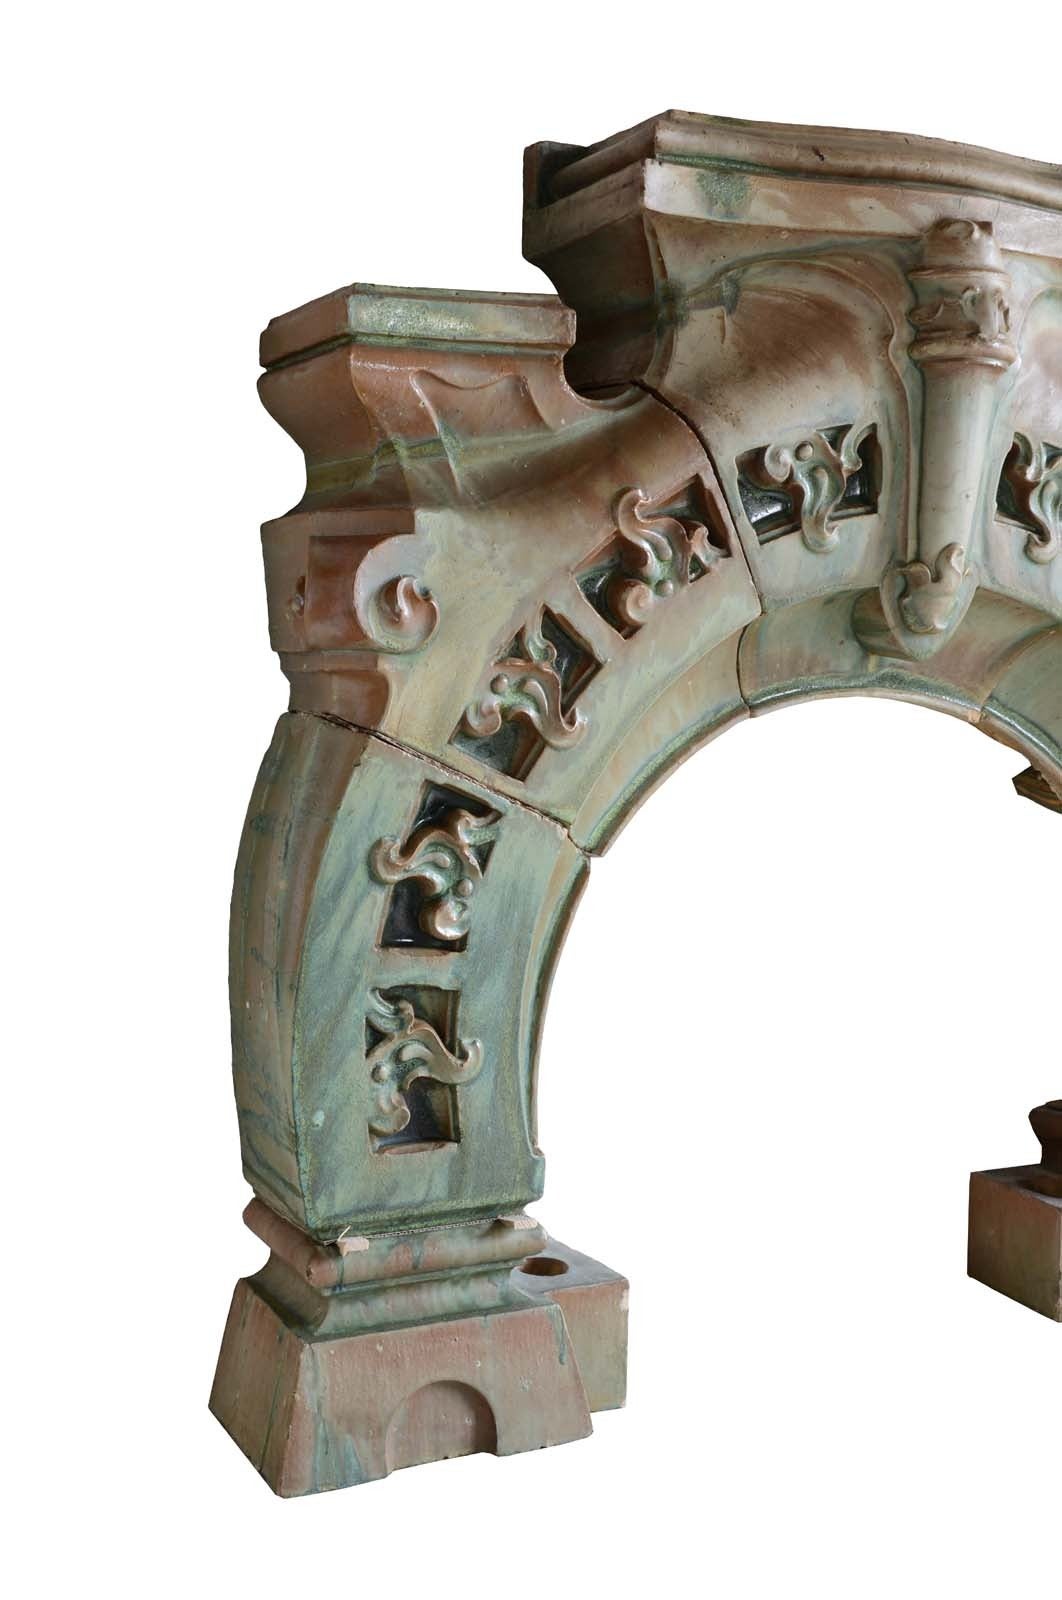 French Art Nouveau period green glazed ceramic fireplace dated late 19th century. Opening size: 32 x 34 in.